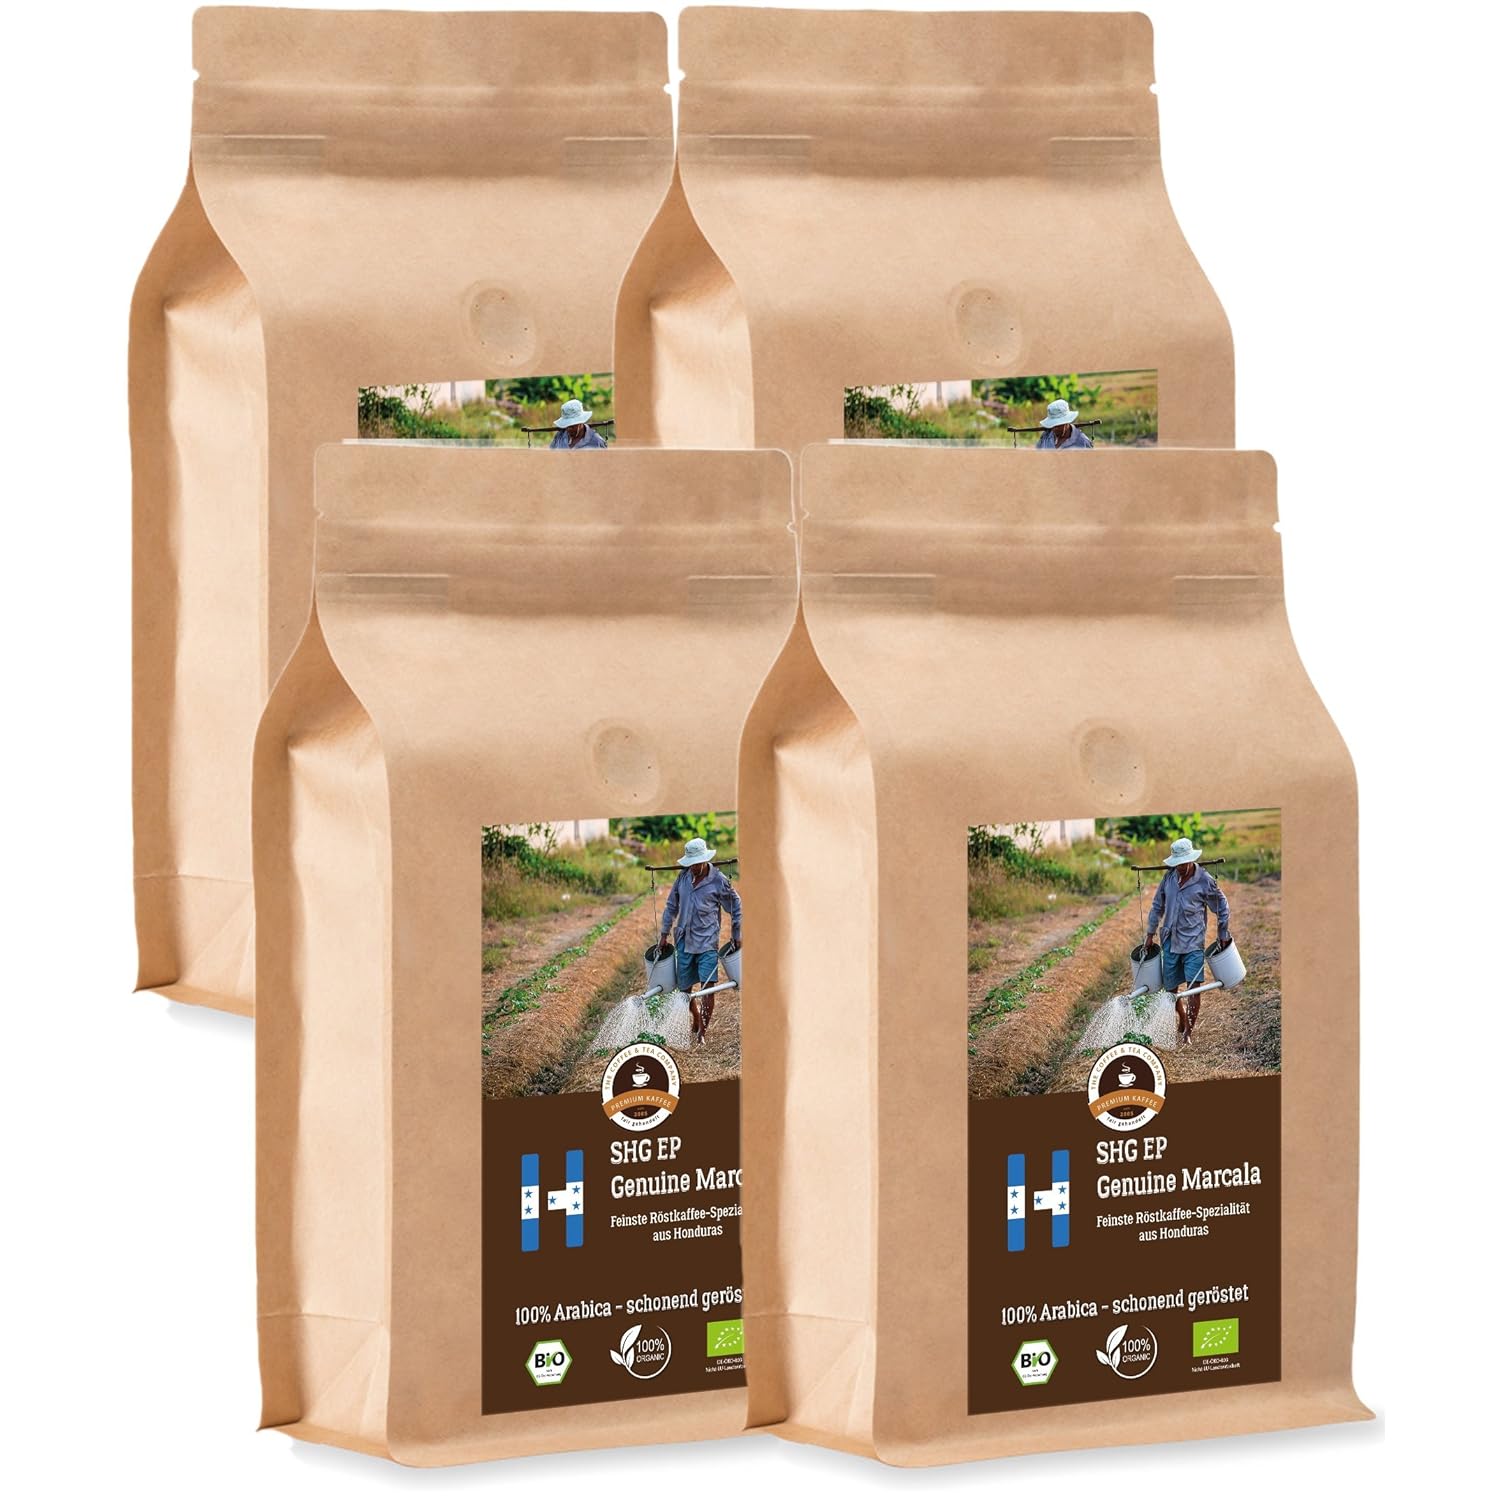 Coffee Globetrotter - Organic Honduras Genuine Marcala - 4 x 1000 g Very Fine Ground - for Fully Automatic Coffee Grinder - Roasted Coffee from Organic Cultivation | Gastropack Economy Pack